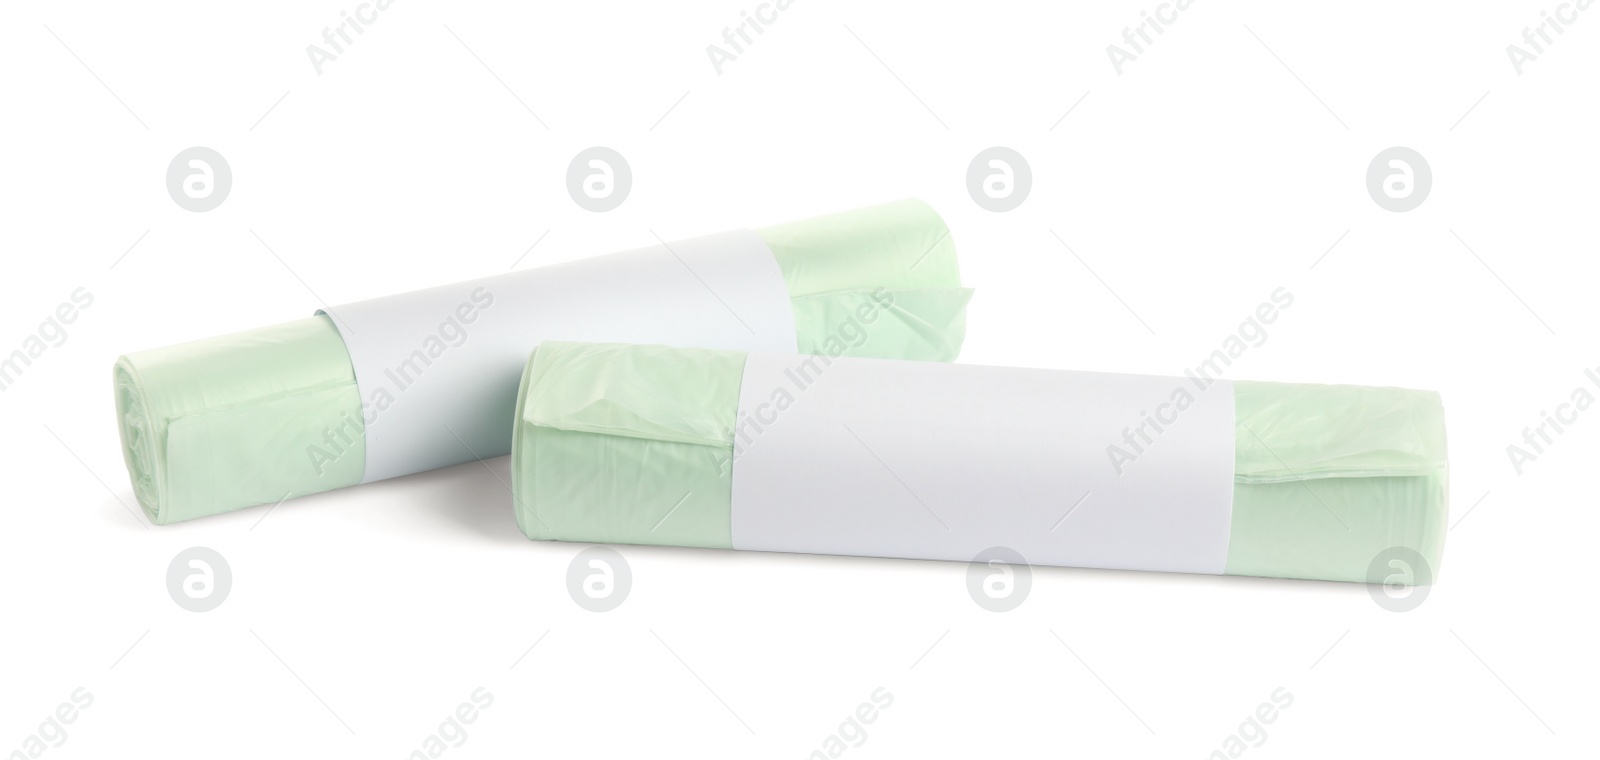 Photo of Rolls of garbage bags on white background. Cleaning supplies